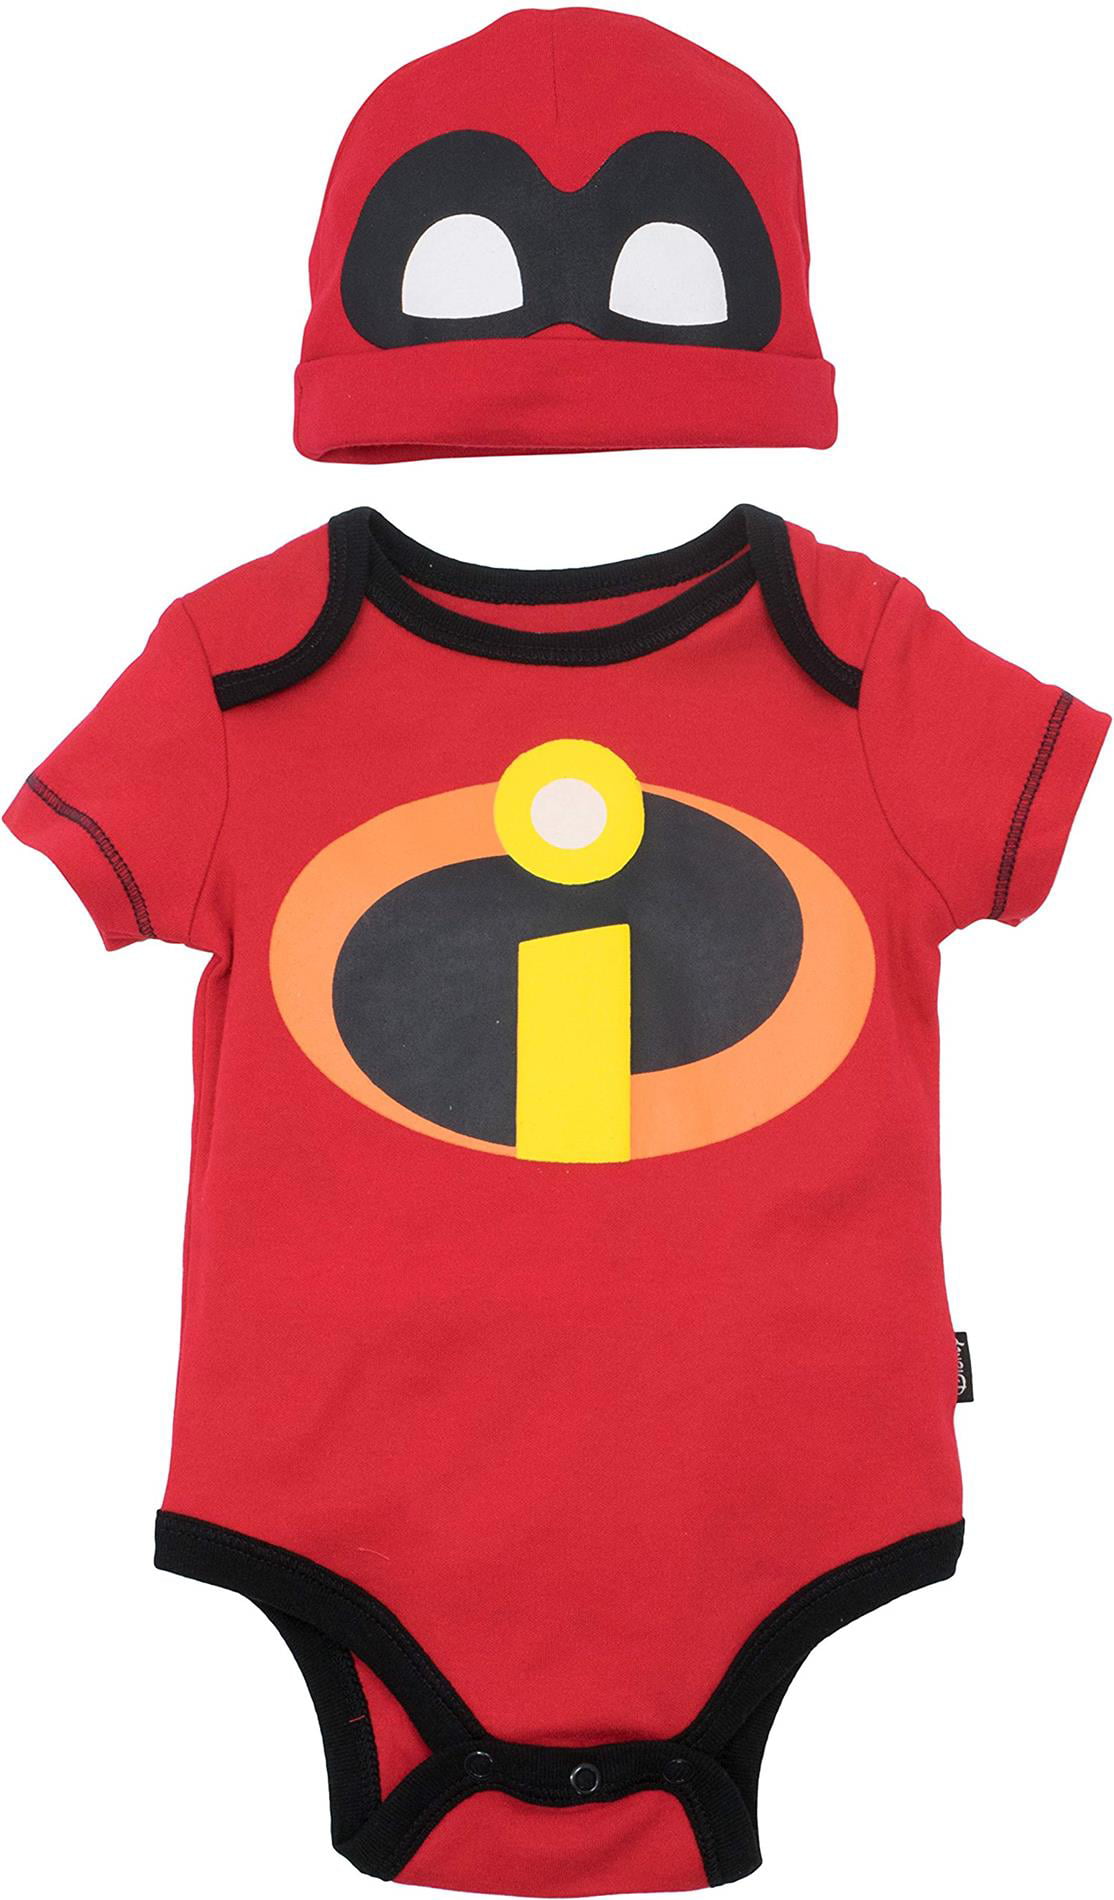 Disney Pixar The Incredibles Baby Costume Bodysuit and Hat Red 